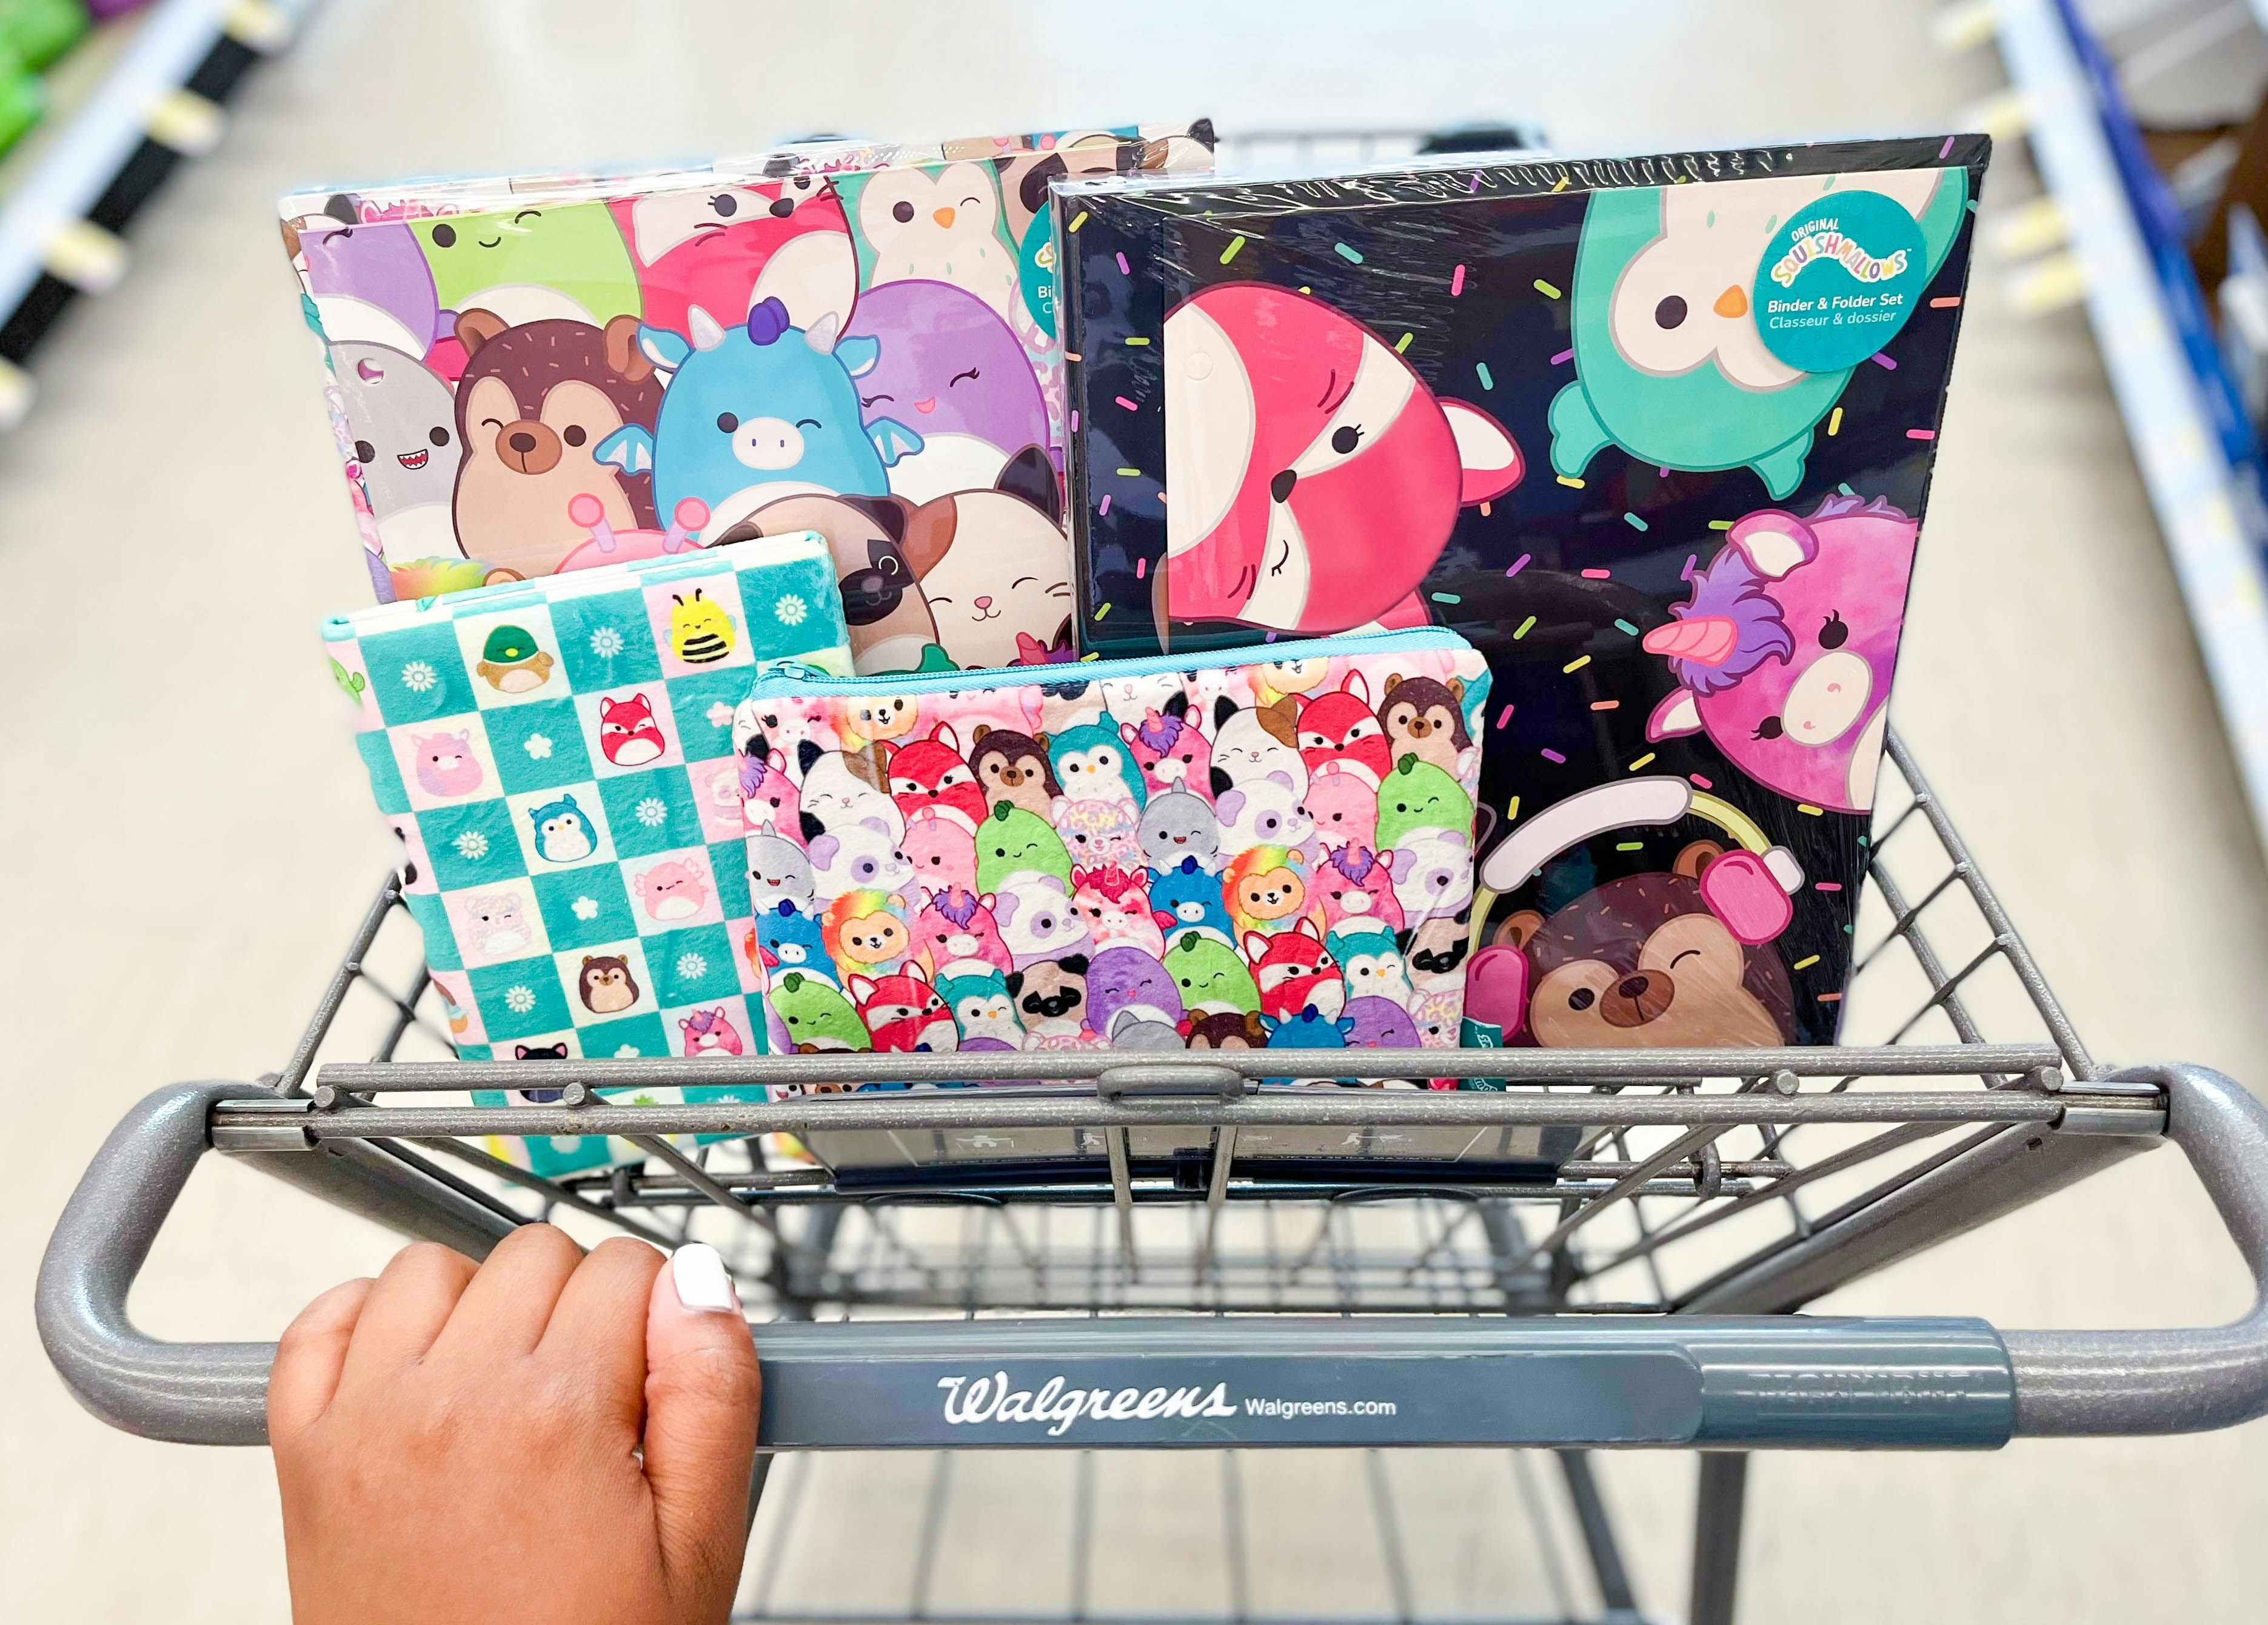 hand on shopping cart handle with Squishmallow pencil pouch, journal, binder sets, and journal inside